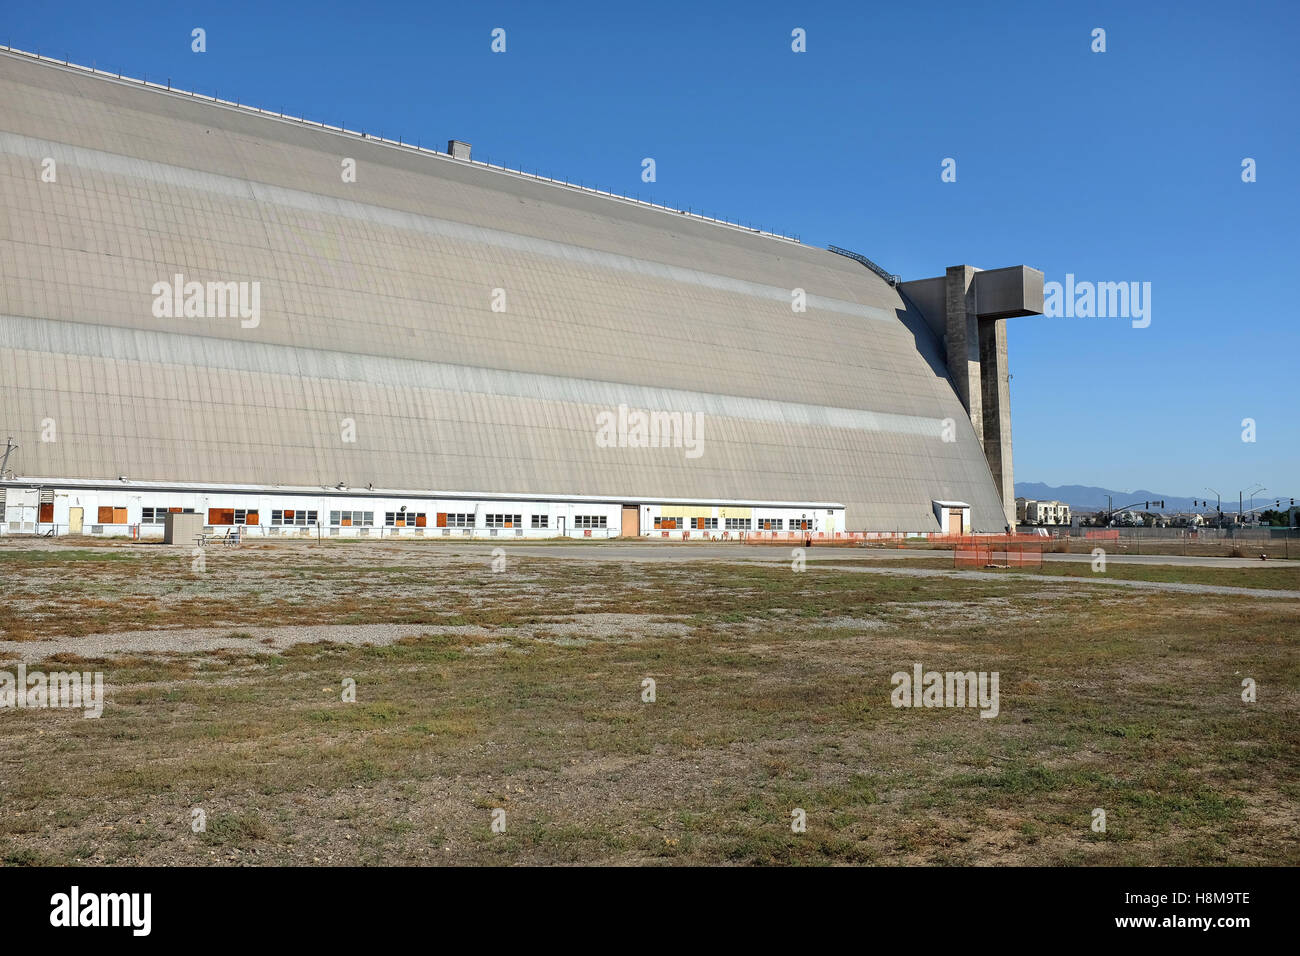 Tustin Blimp Hangar, Building 29 with new construction that is cropping up around the iconic structures. Stock Photo